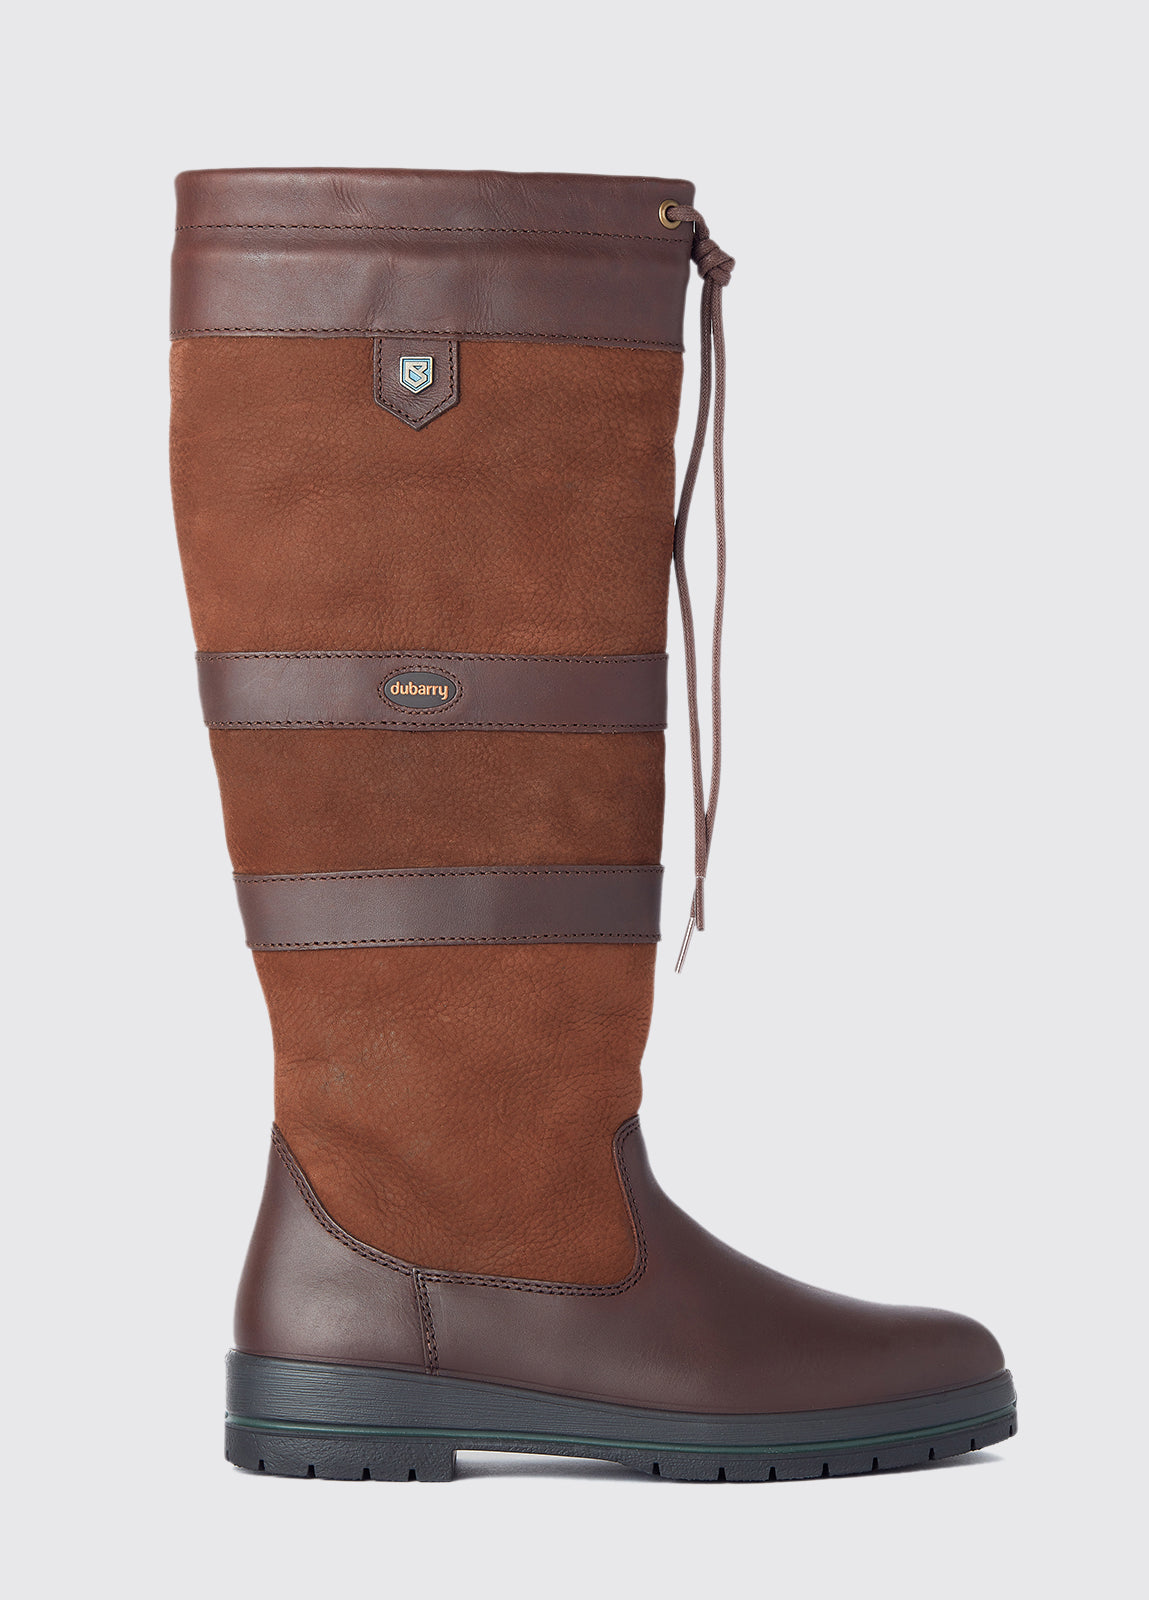 Dubarry Galway Country Boot - Walnut